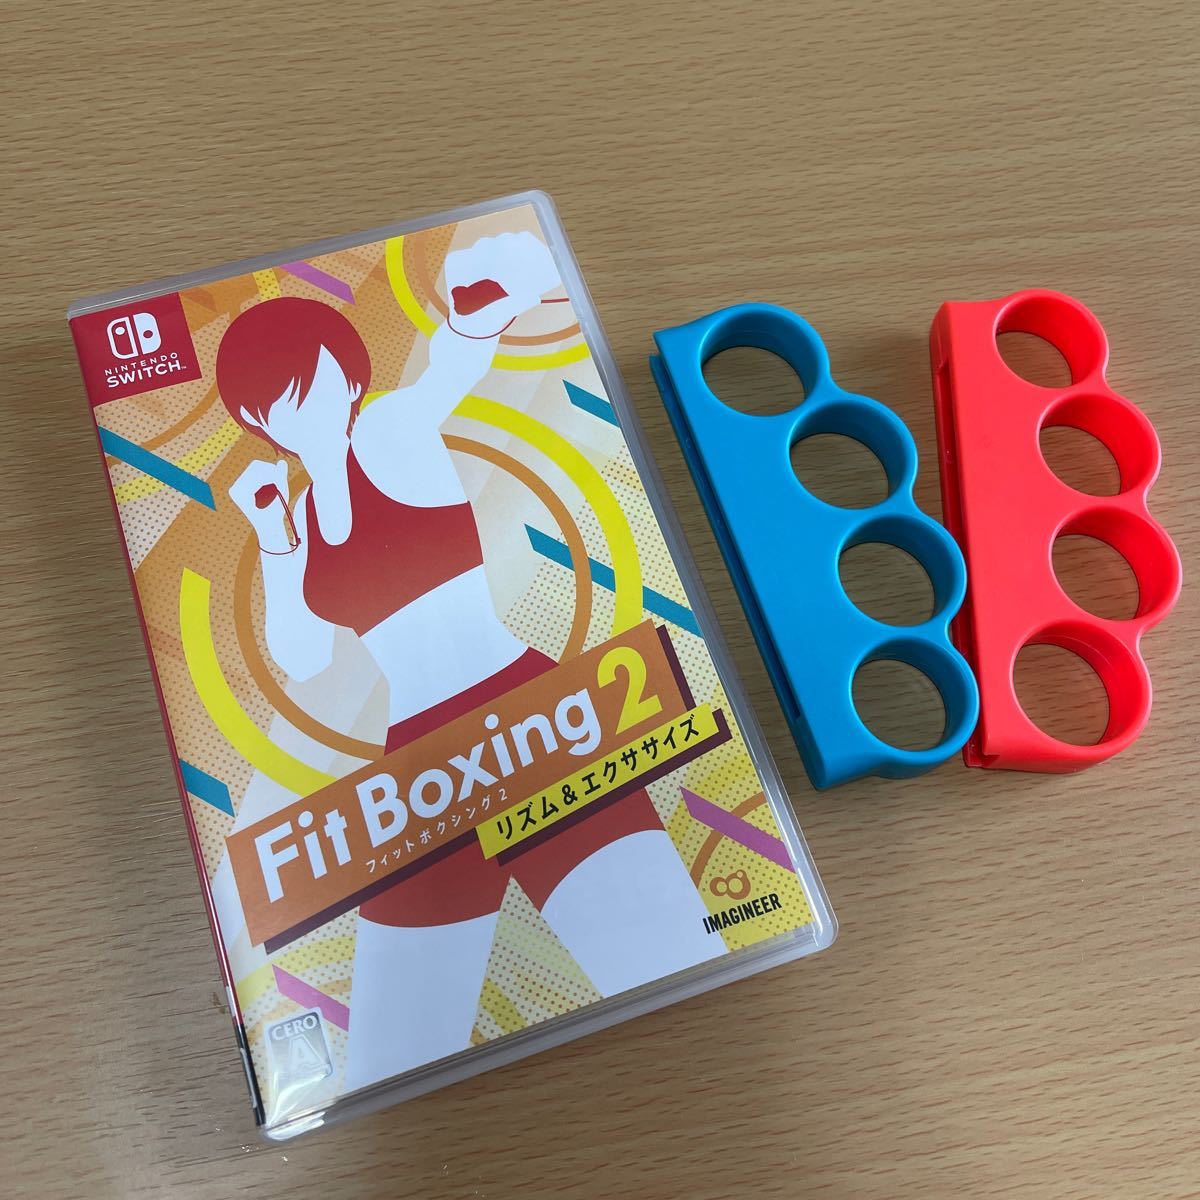 Switch Fit Boxing 2 -リズム＆エクササイズ-セット